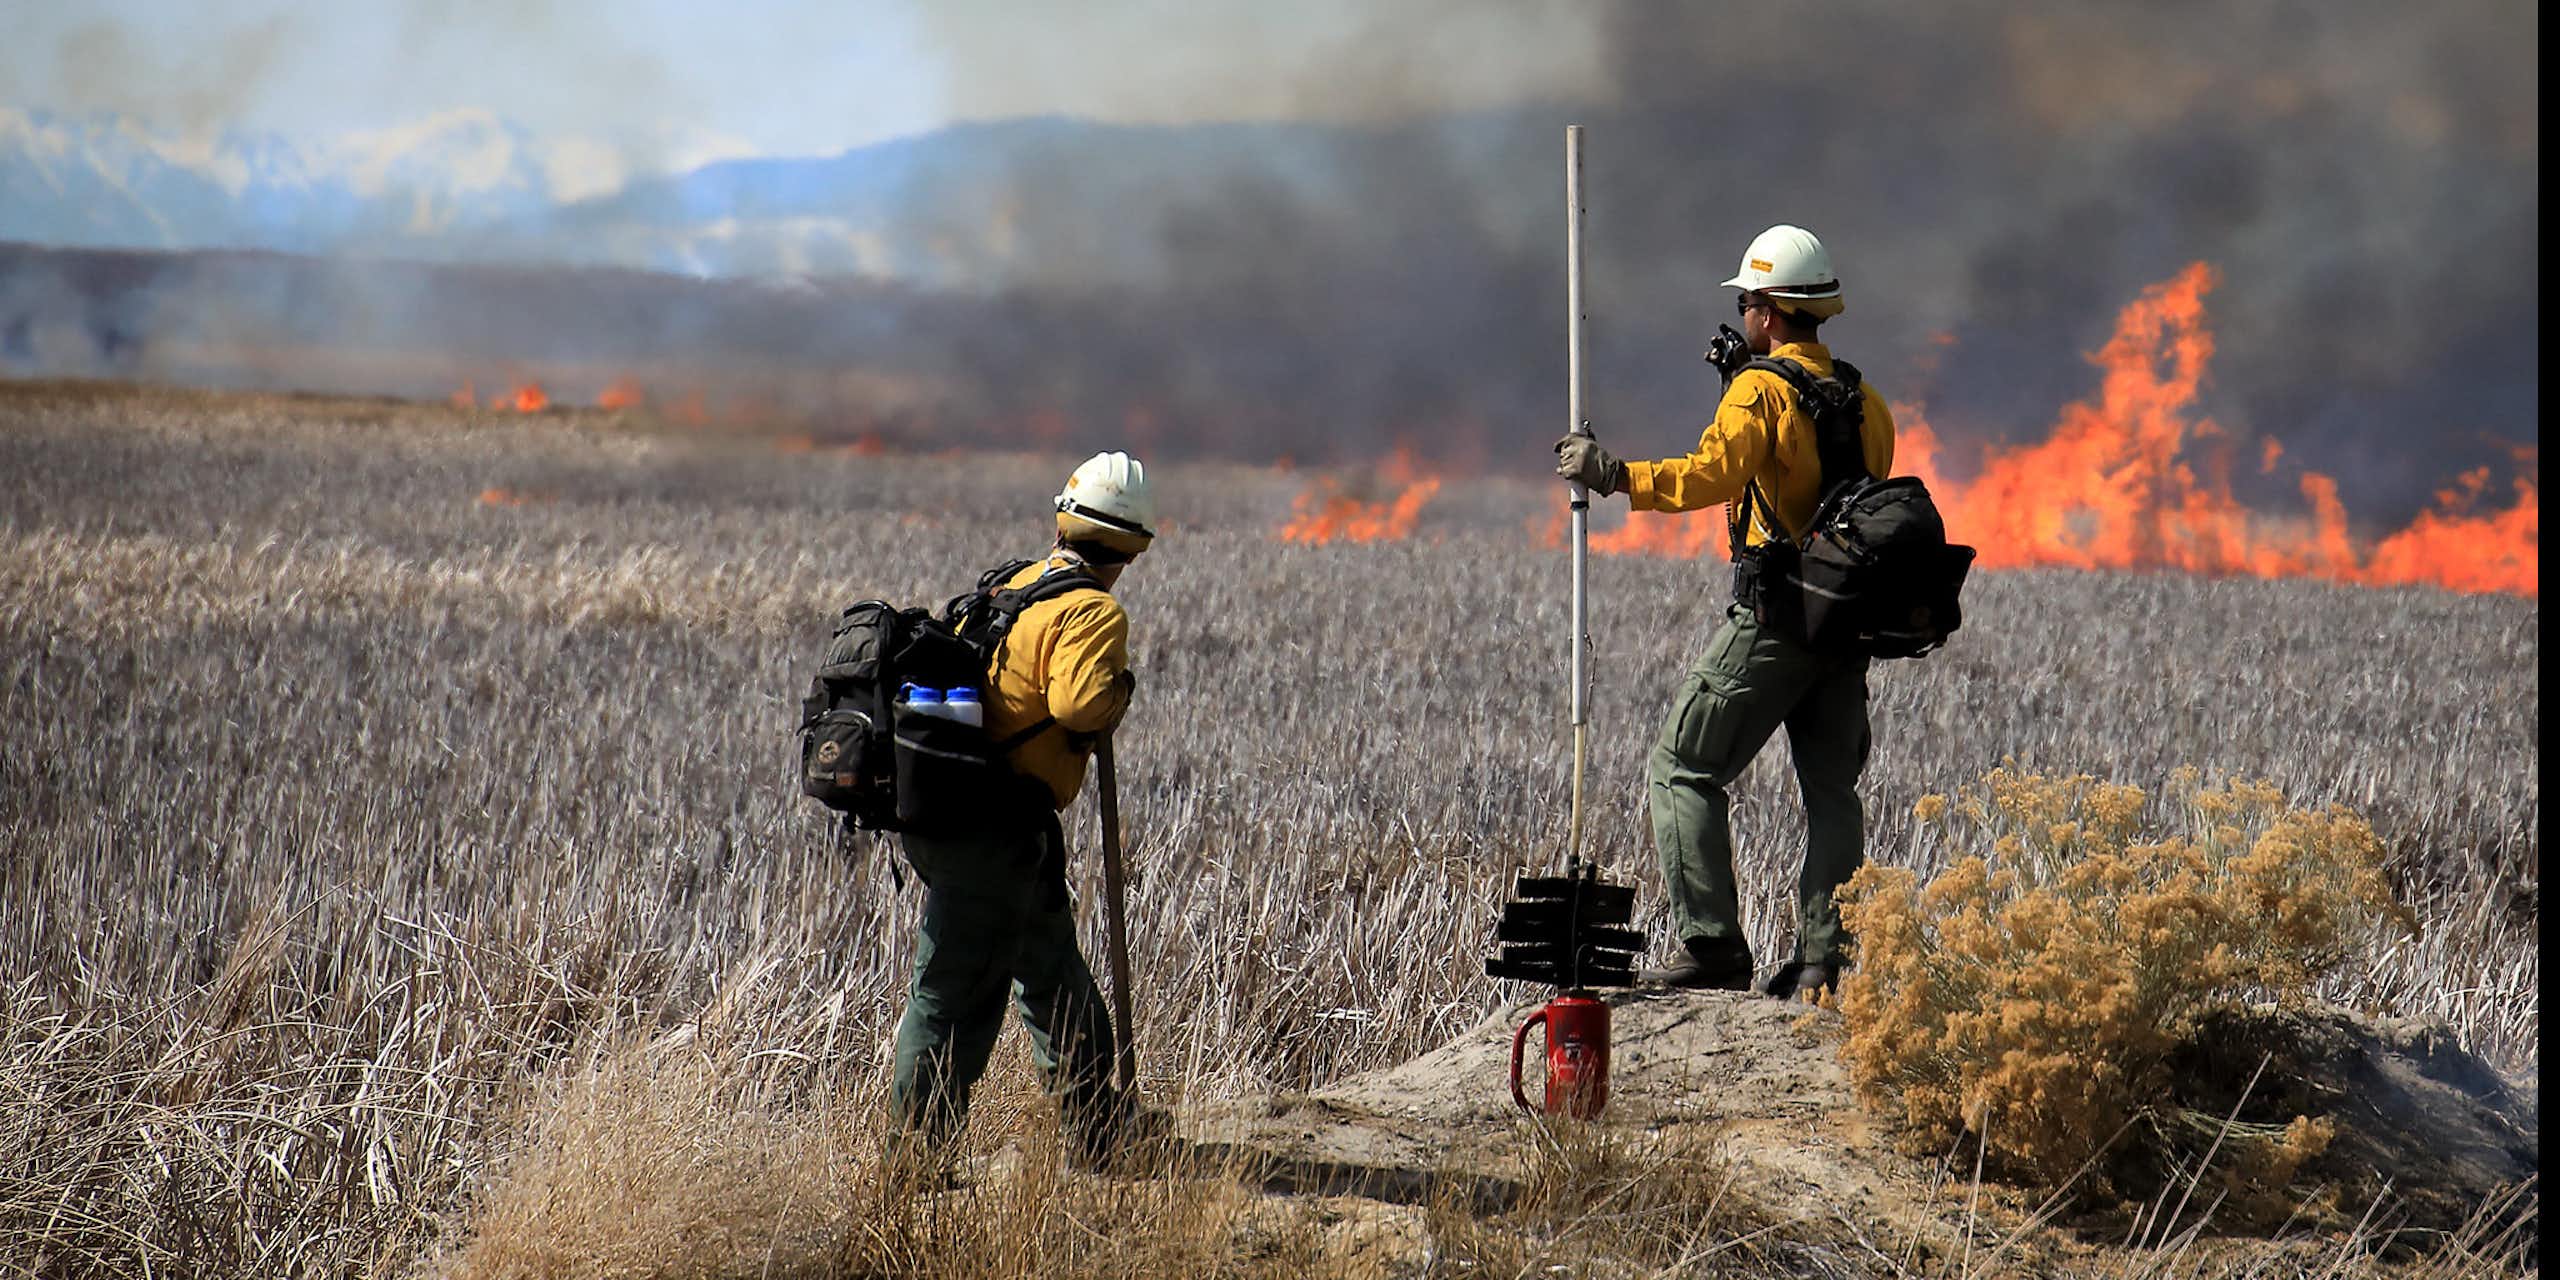 Two firefighters watch a line of flames through dry grass with mountains in the background.